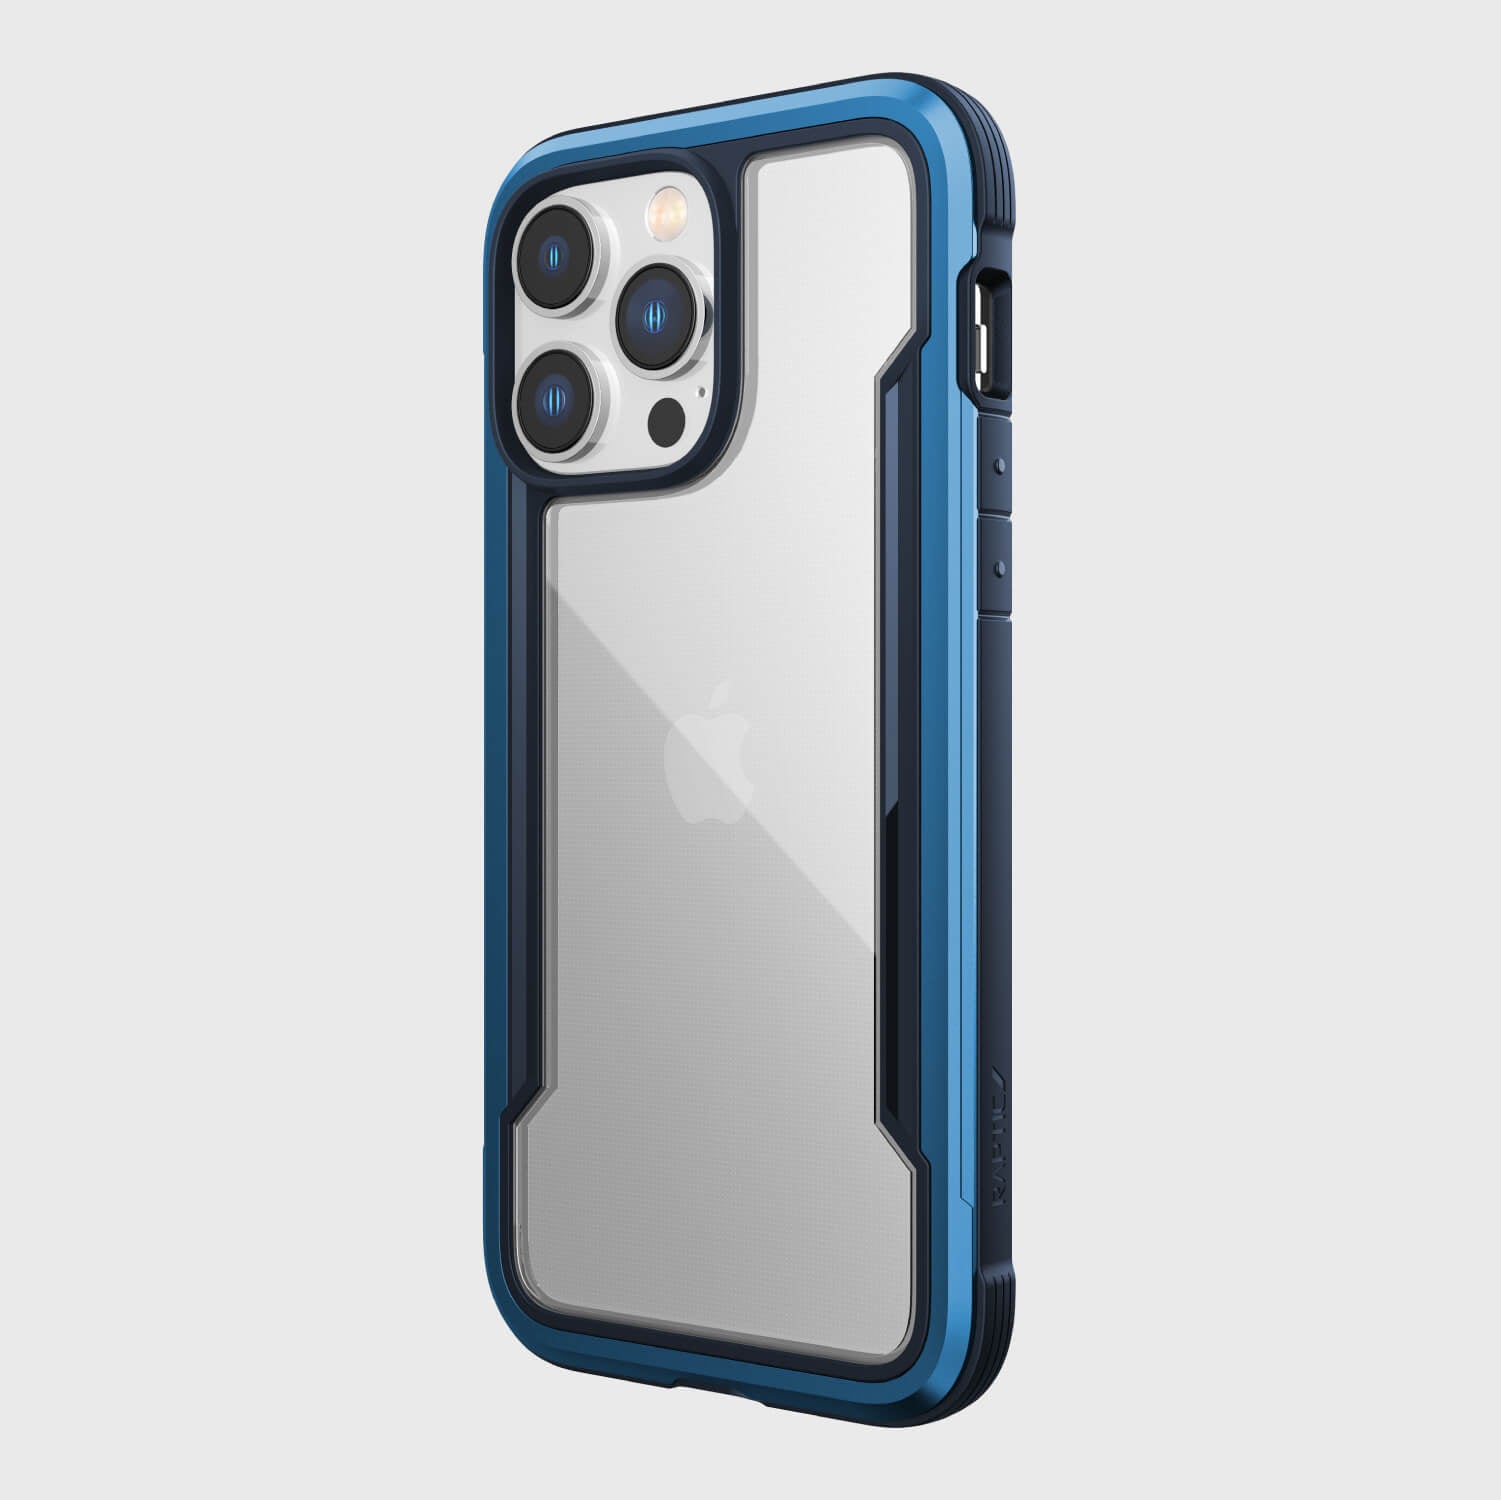 The back view of an iPhone 14/15 Pro Max Case - Shield by Raptic in blue with MagSafe charger compatibility.